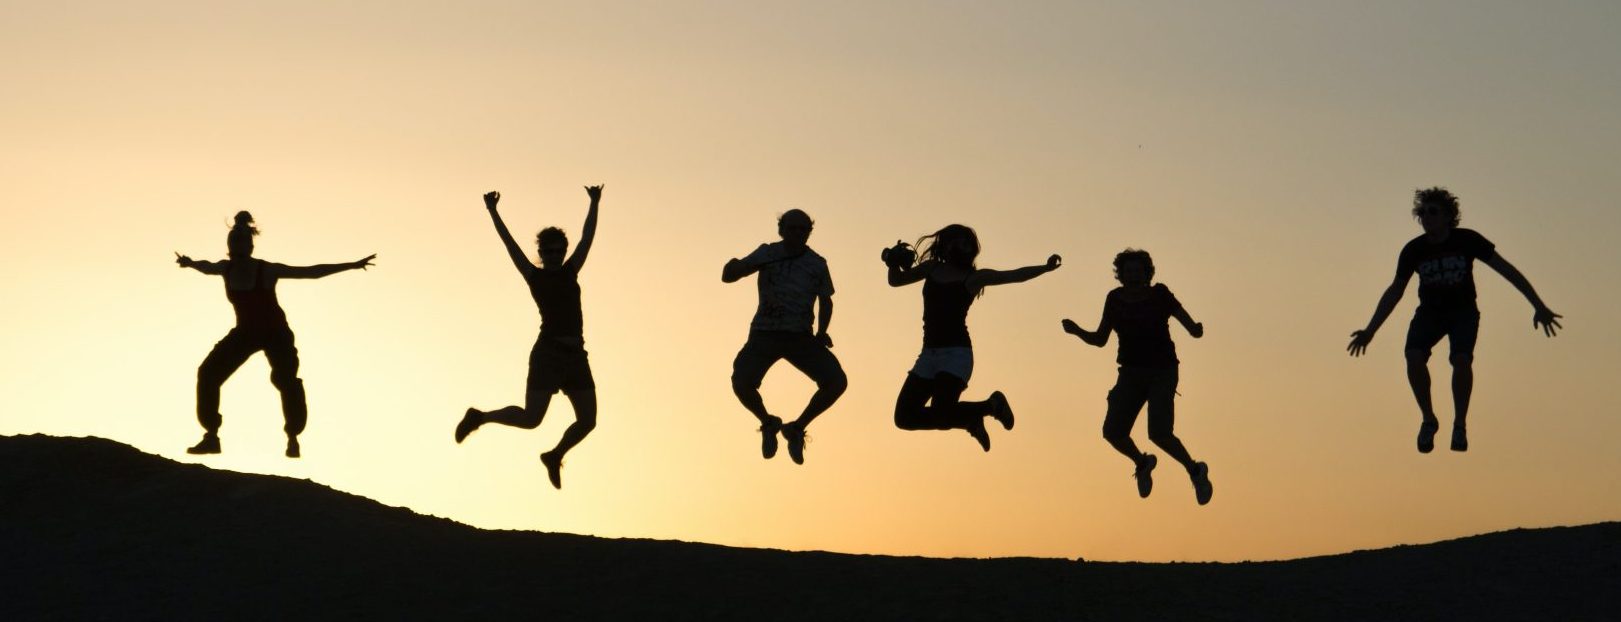 Silhouettes of a Group of People Jumping at Sunset